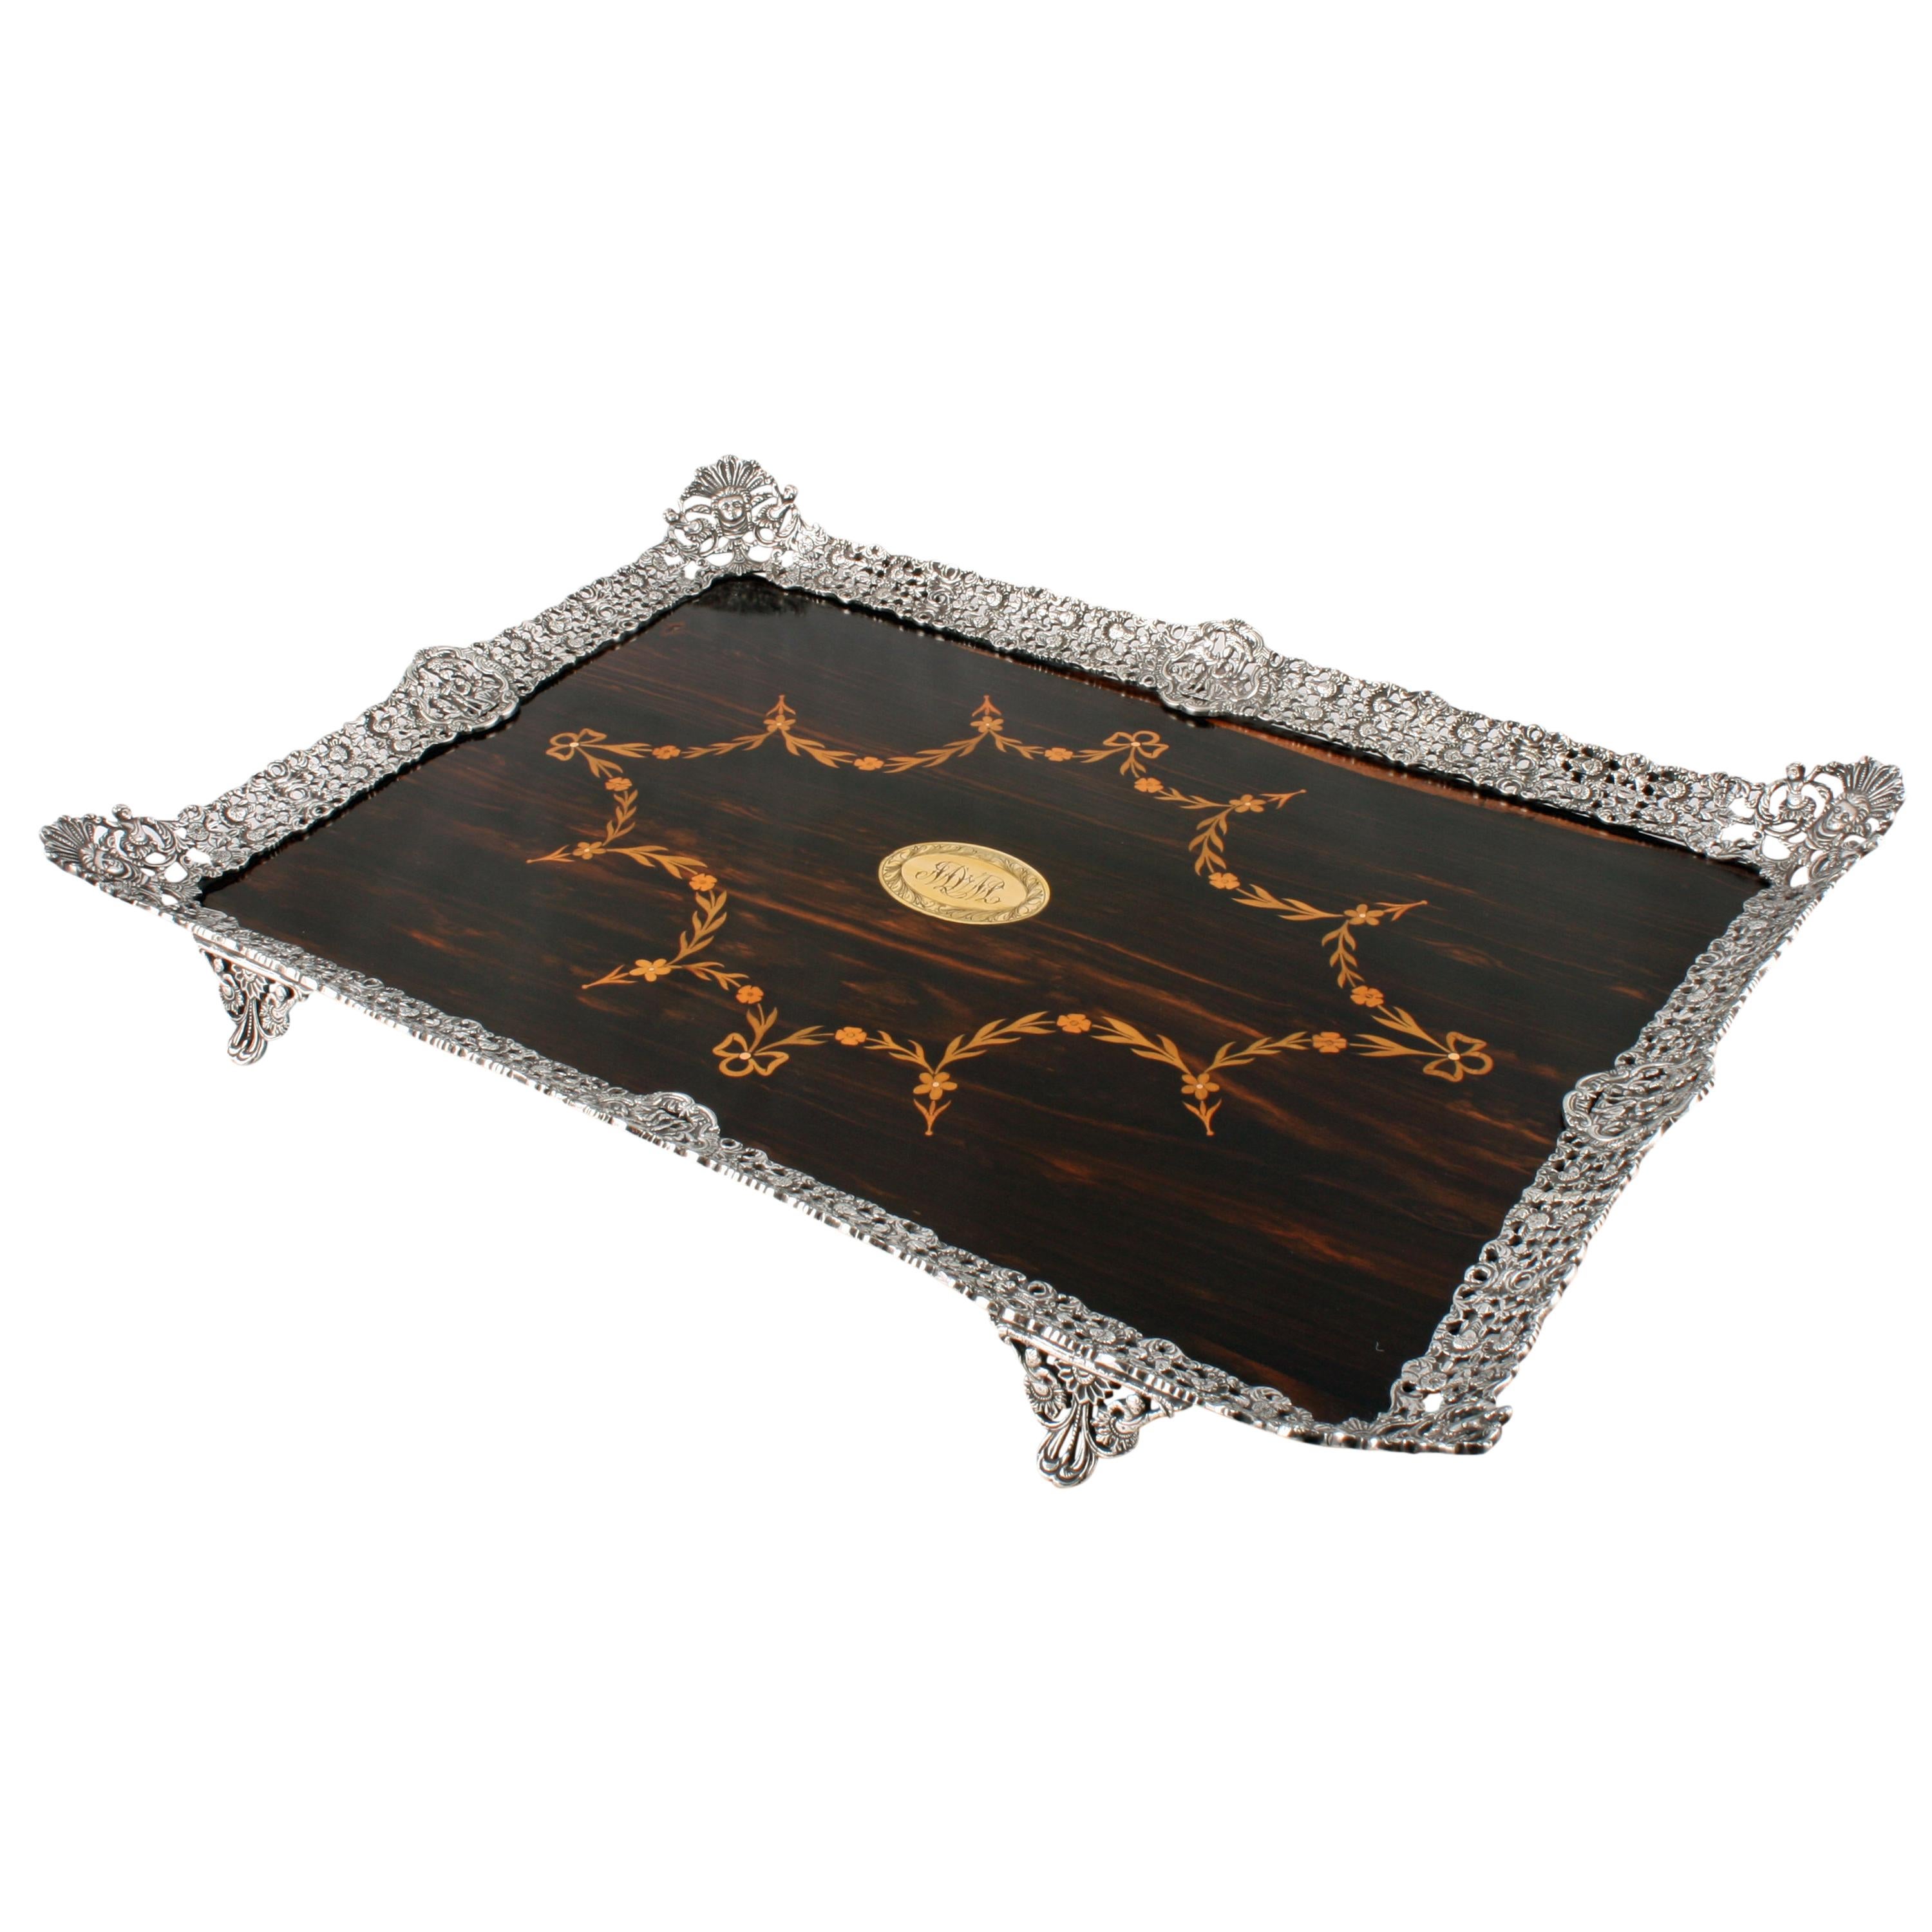 A very unusual fine Victorian coromandel and silver plate tray.

The tray has a coromandel wood center with a silver plated pierced gallery edge and feet.

The center panel is mahogany with coromandel wood veneer and is marquetry inlaid with